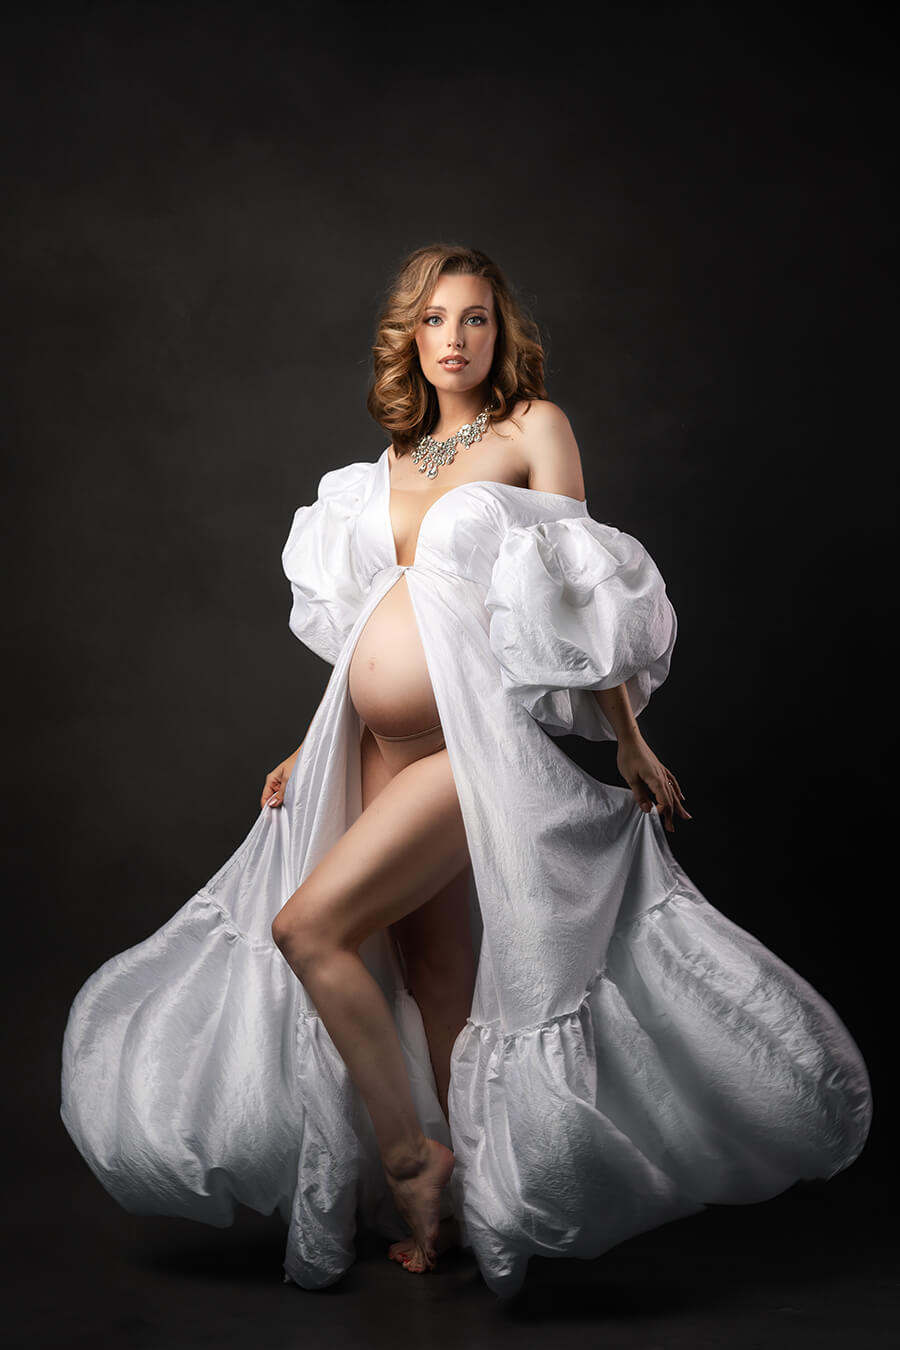 pregnant model in a studio poses wearing a long and open in the middle white dress made of taft. the dress has exaggerated sleeves